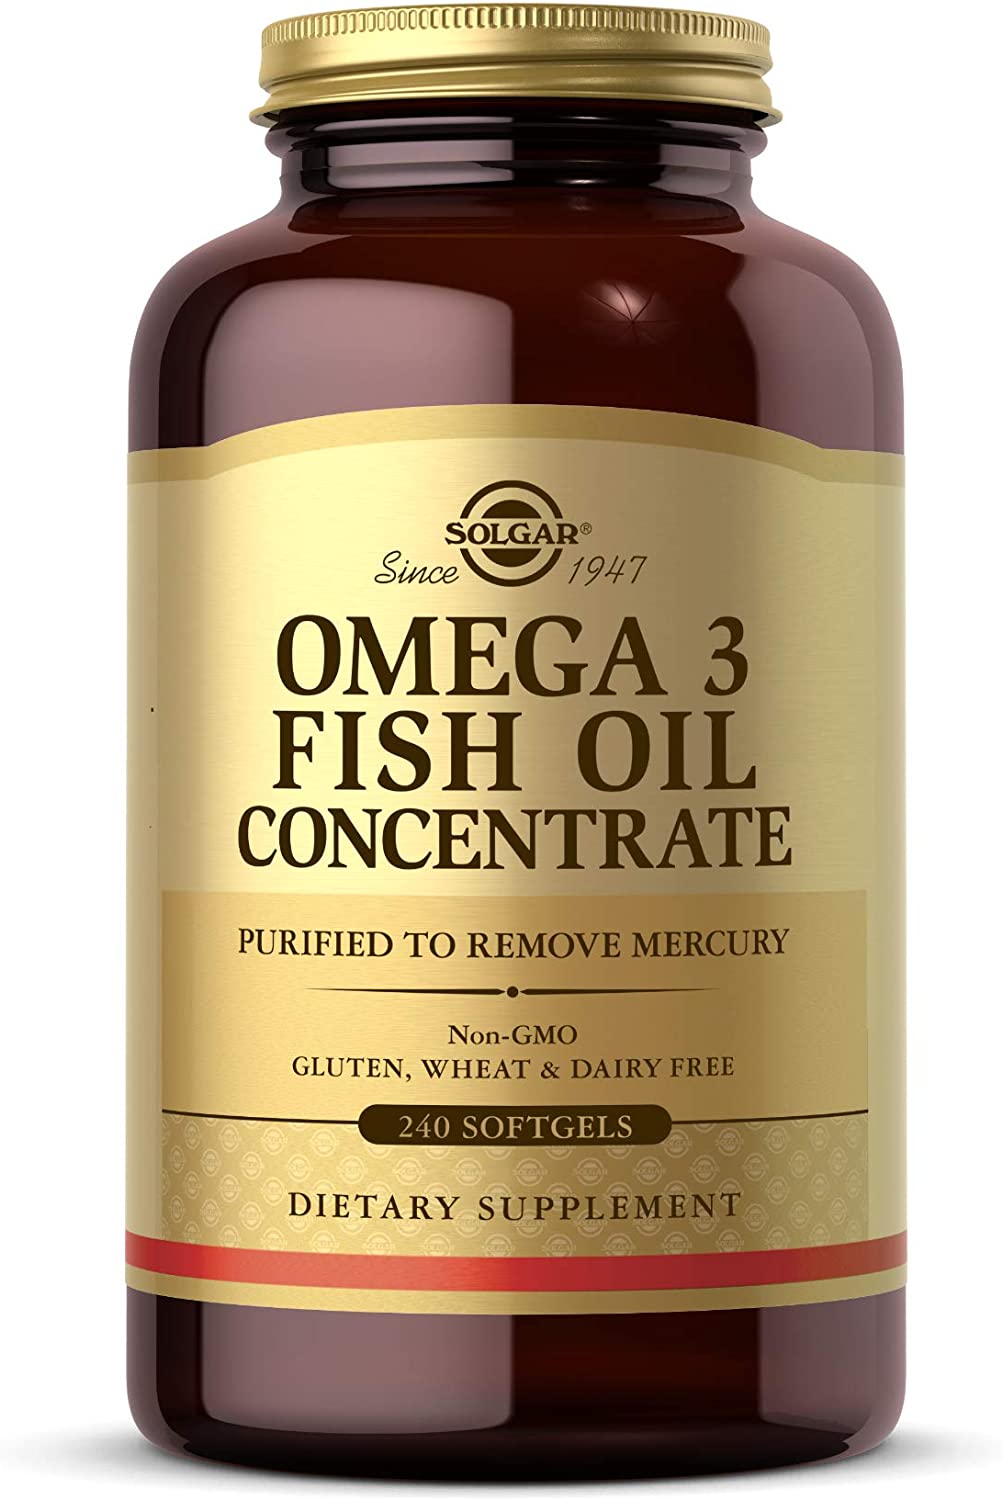 OMEGA- 3 FISH OIL CONCENTRATE SOFTGELS